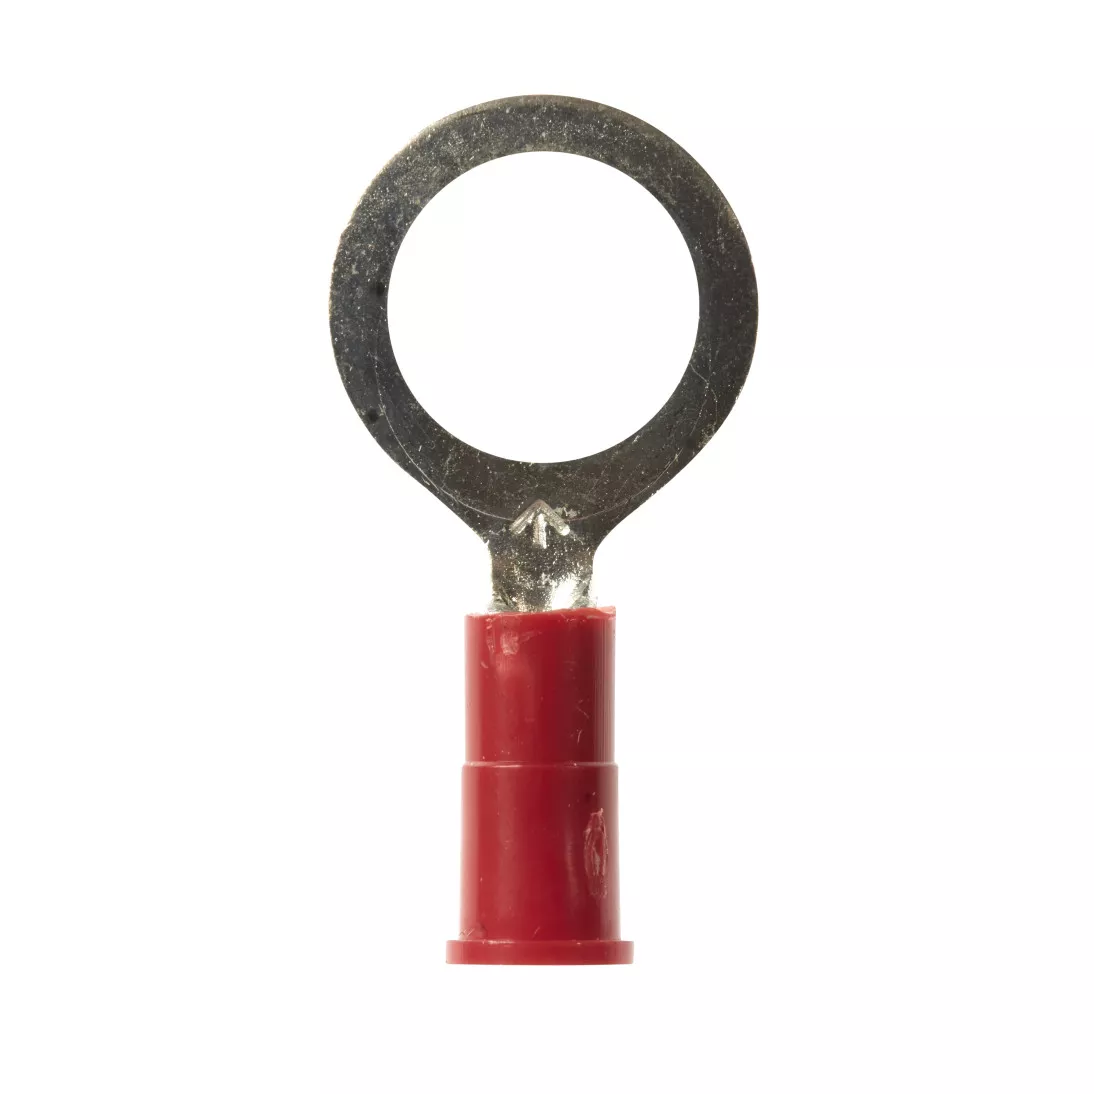 3M™ Scotchlok™ Ring Vinyl Insulated, 100/bottle, MV18-38RX,
standard-style ring tongue fits around the stud